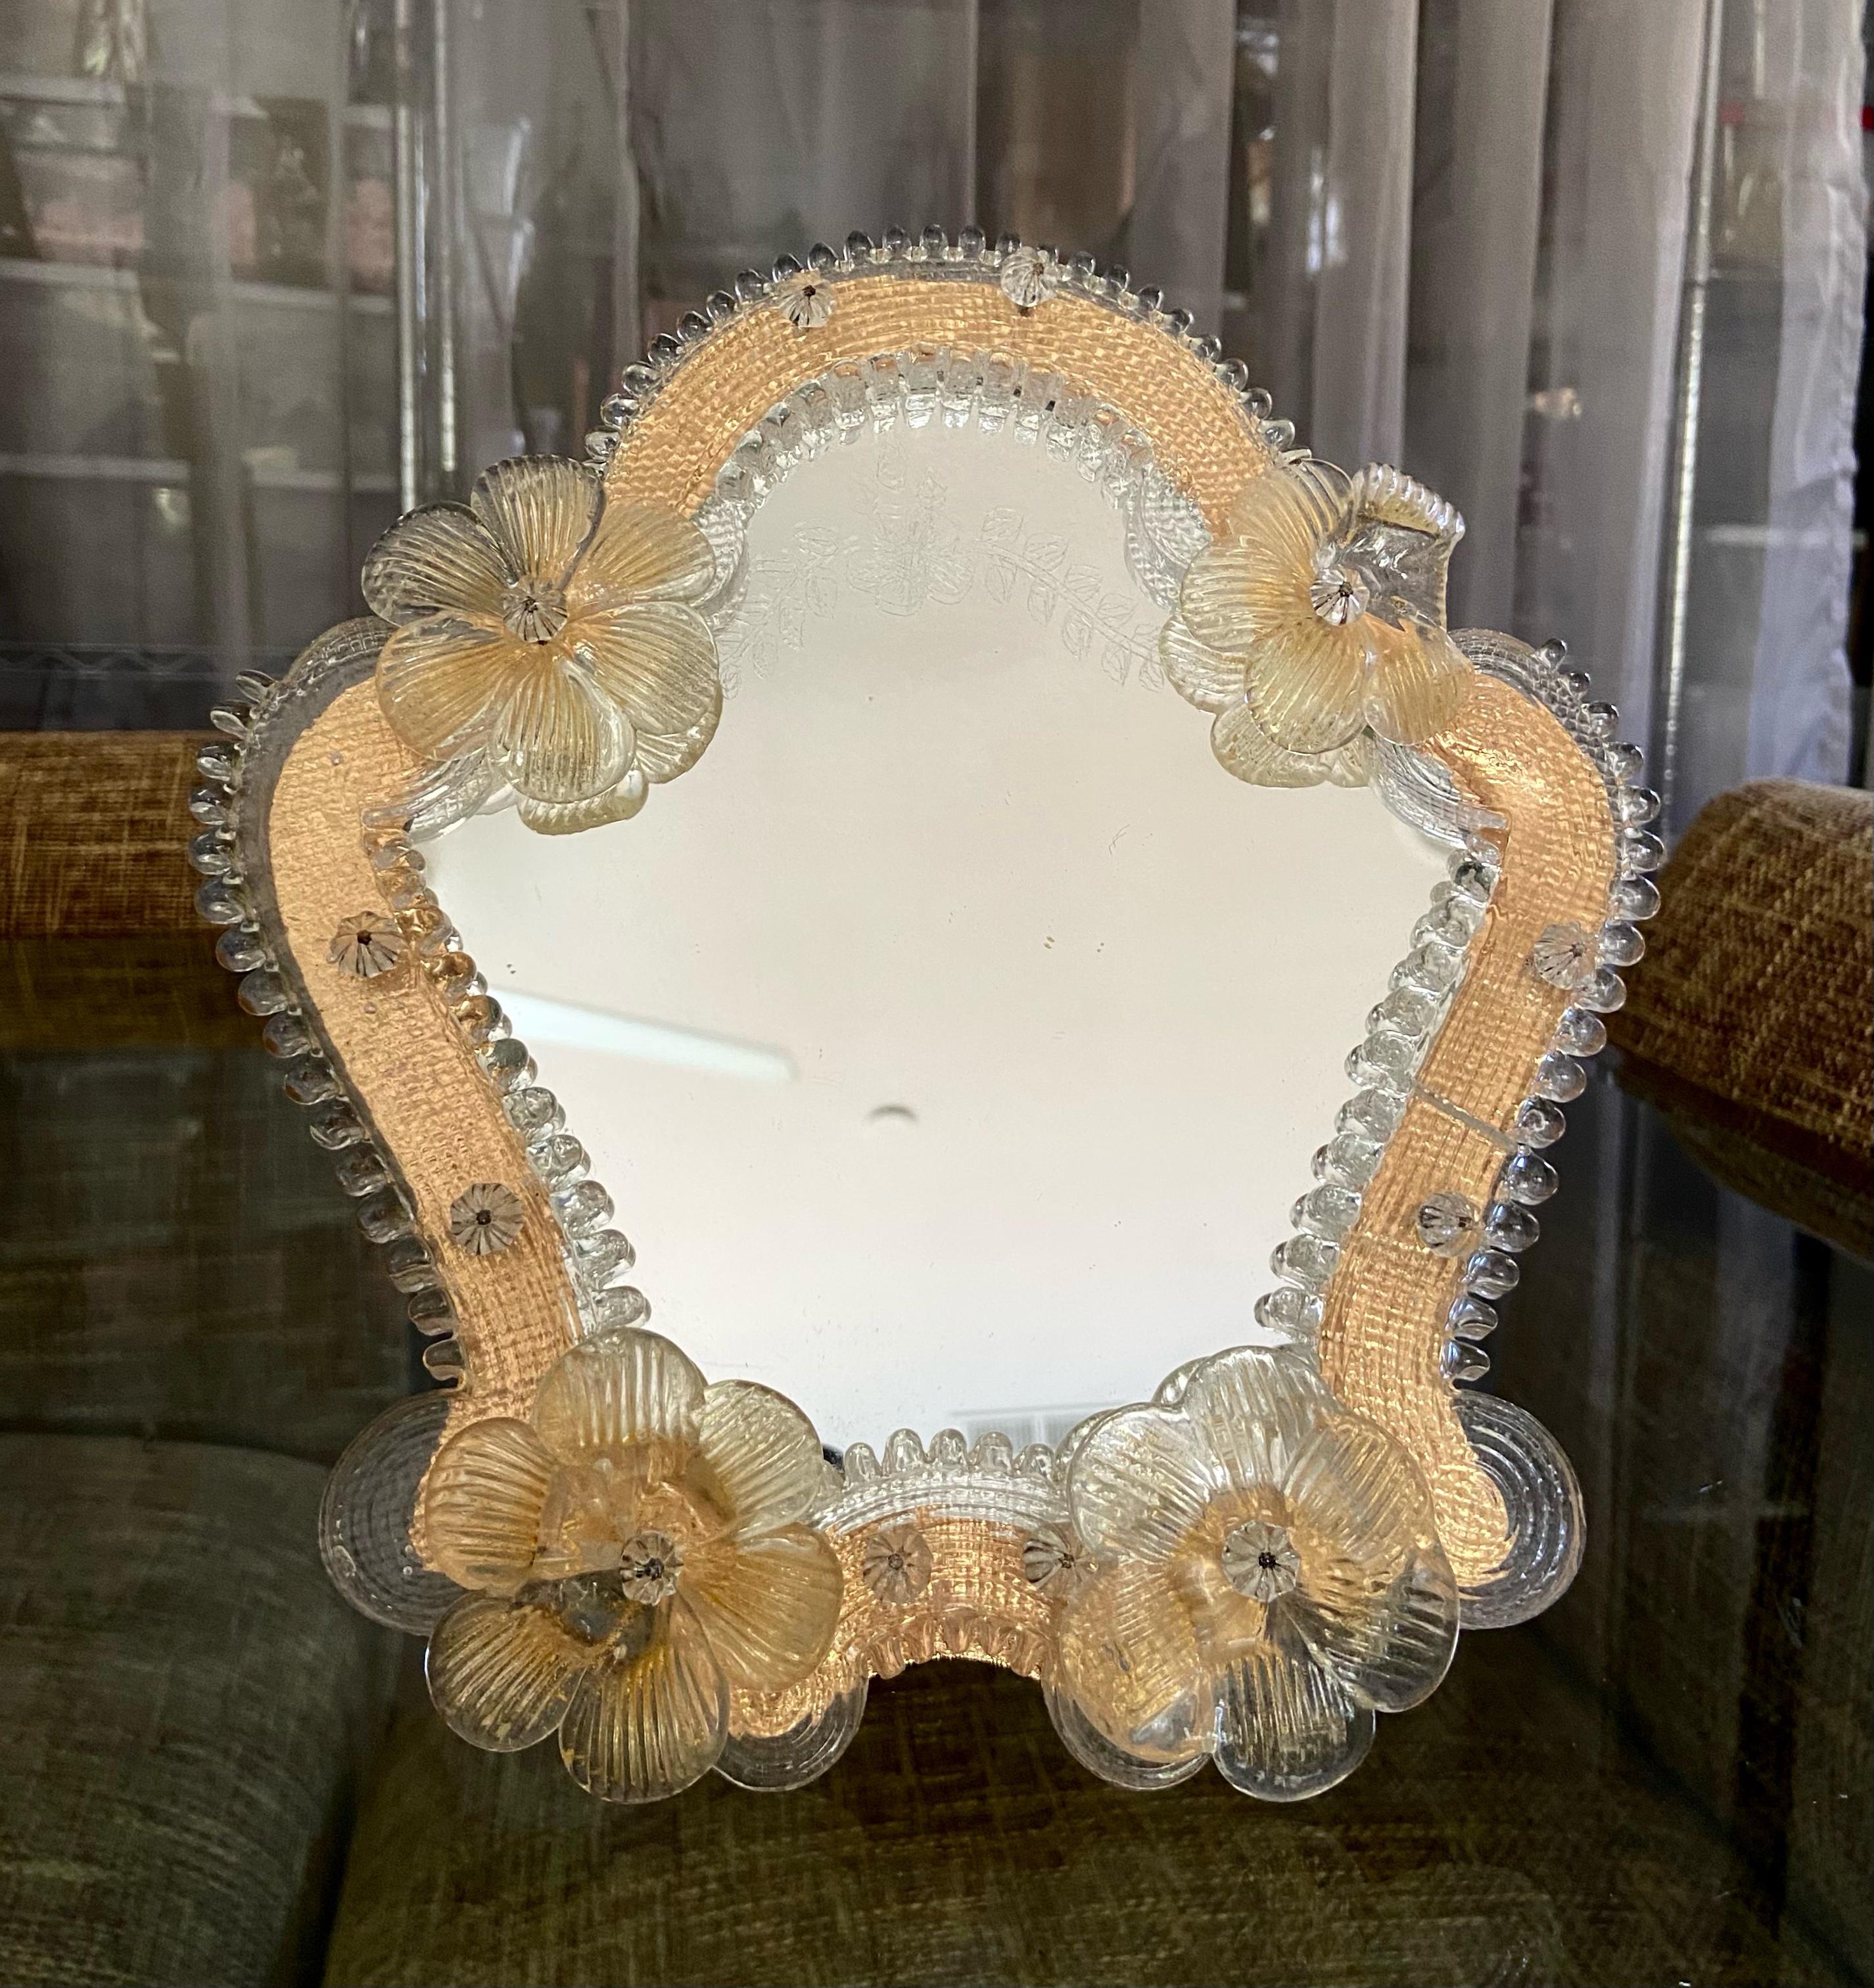 Murano smaller scale vanity table mirror with clear and gold flowers, and light amber color glass pieces surrounding the mirror. Mirror glass has decorative etching. The stand and backing are wood. 
  